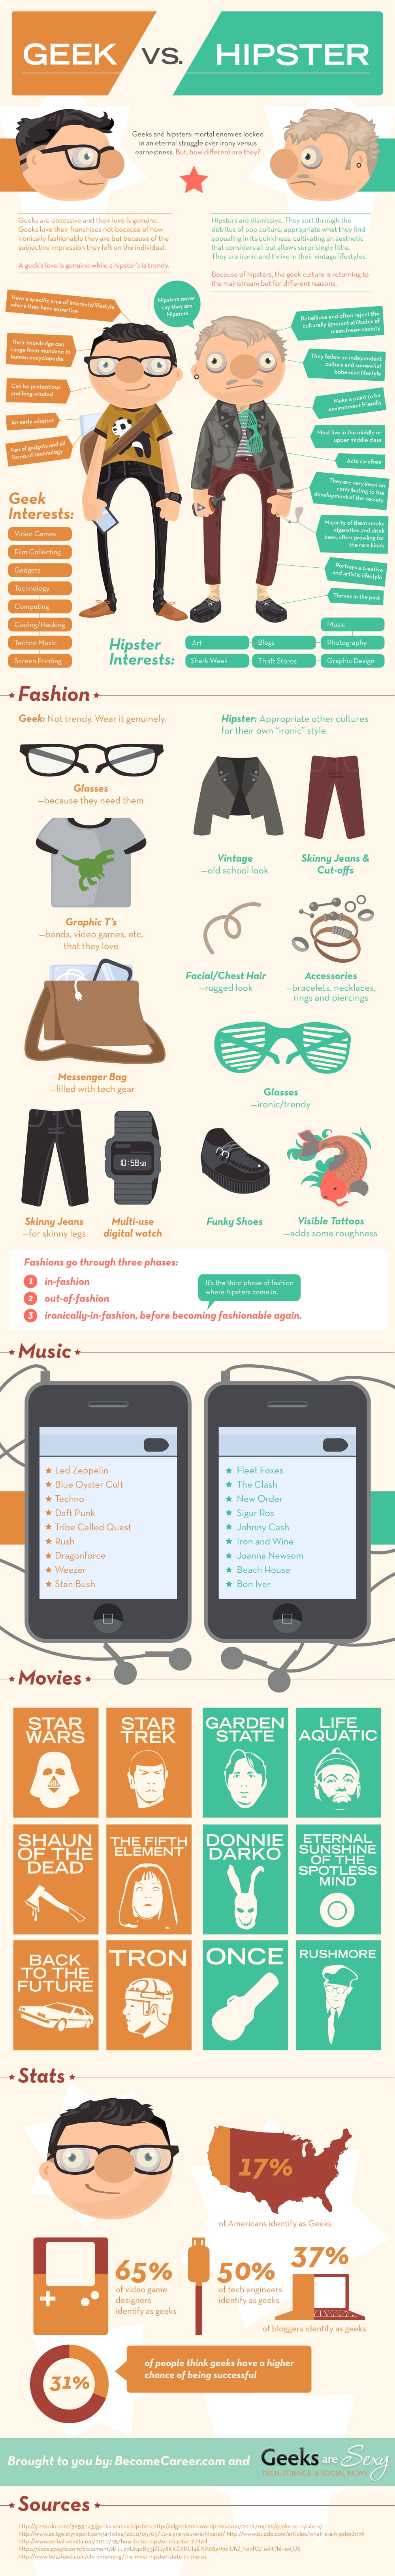 Geeks vs. Hipsters [Infographic]